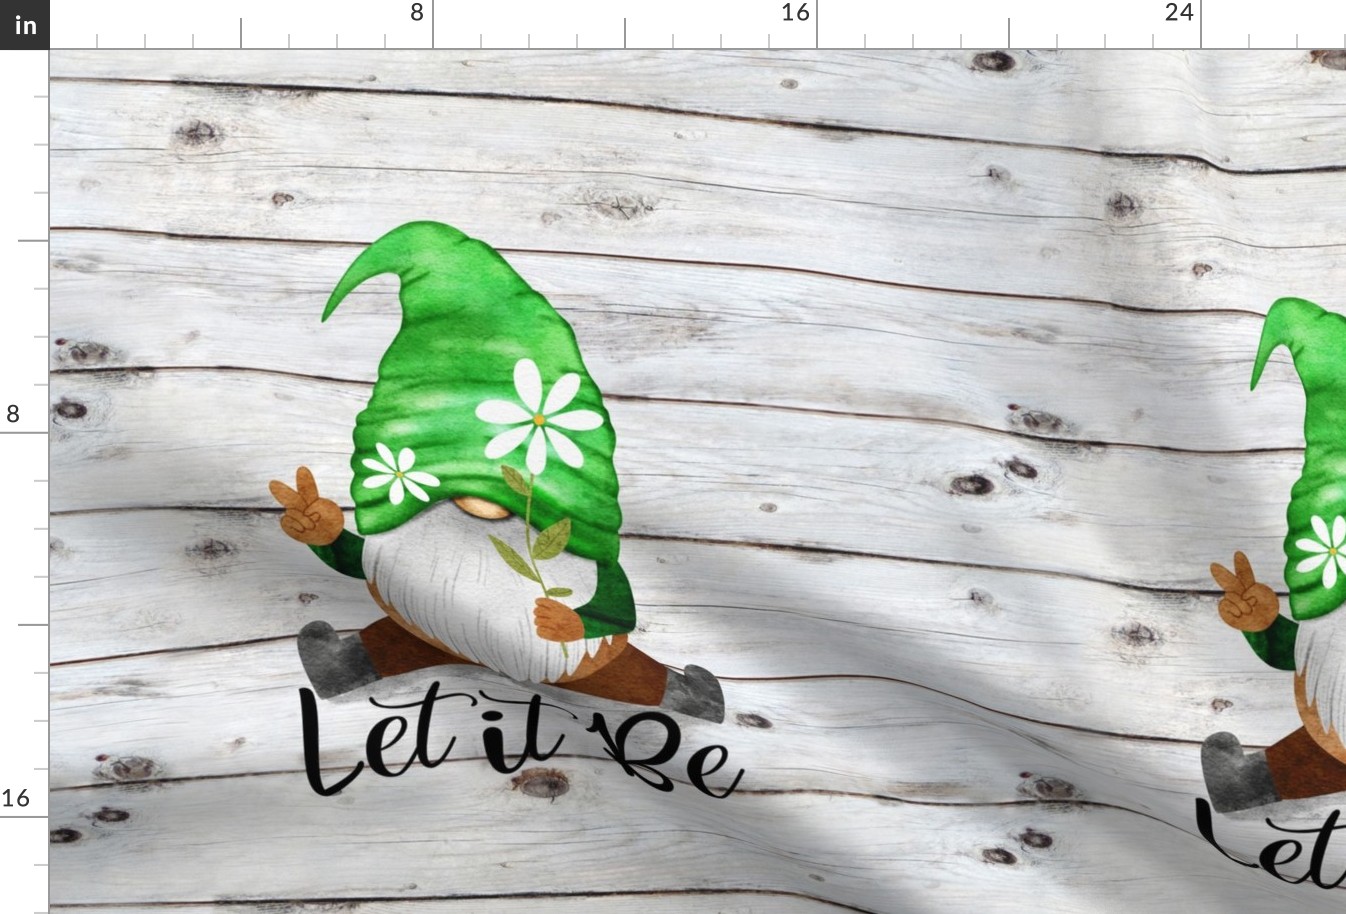 Let It Be Green Daisy Gnome 18 inch square